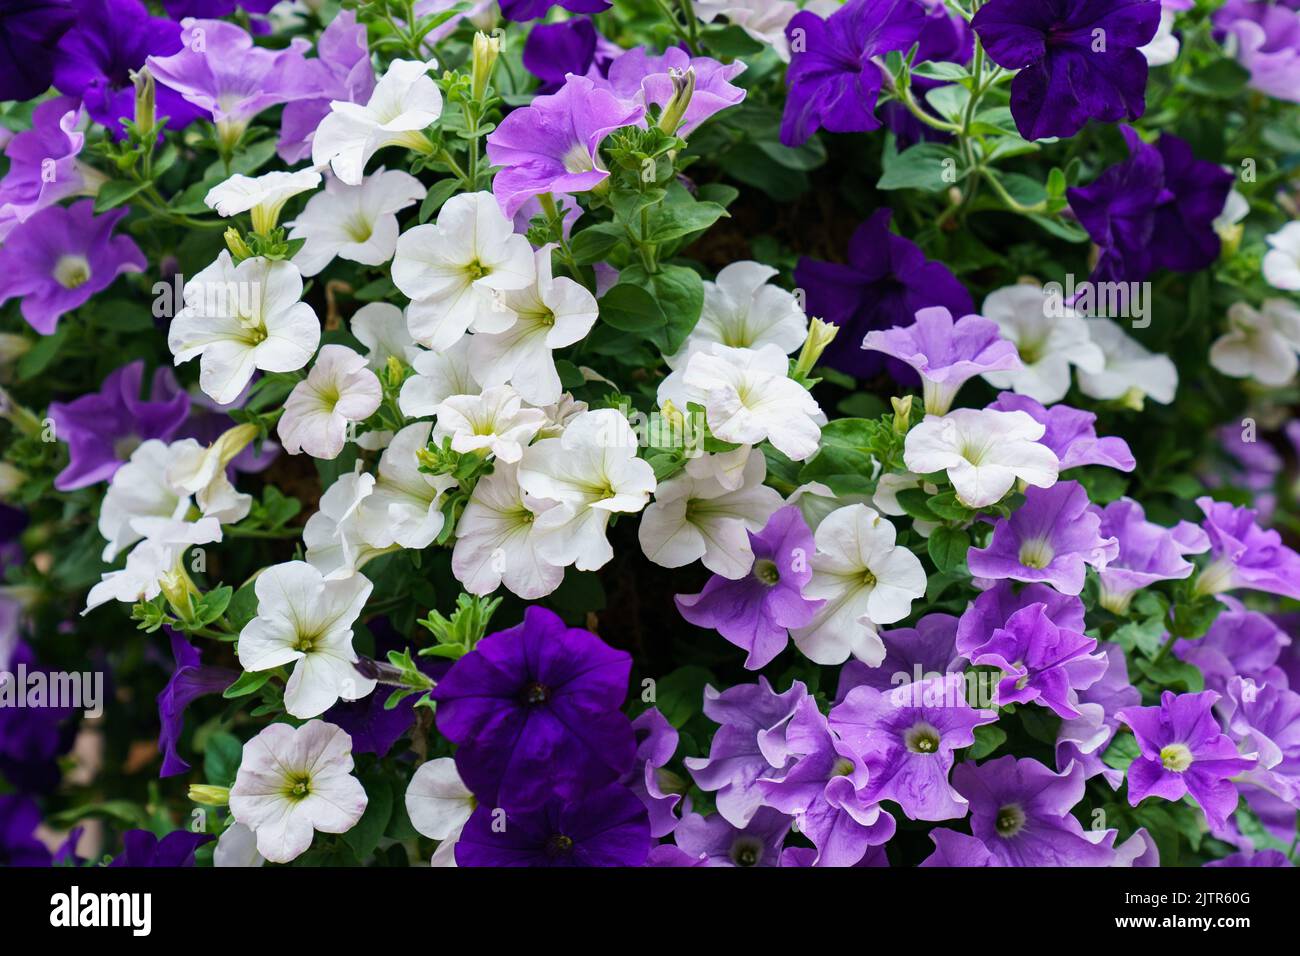 Purple and white Flowers Stock Photo